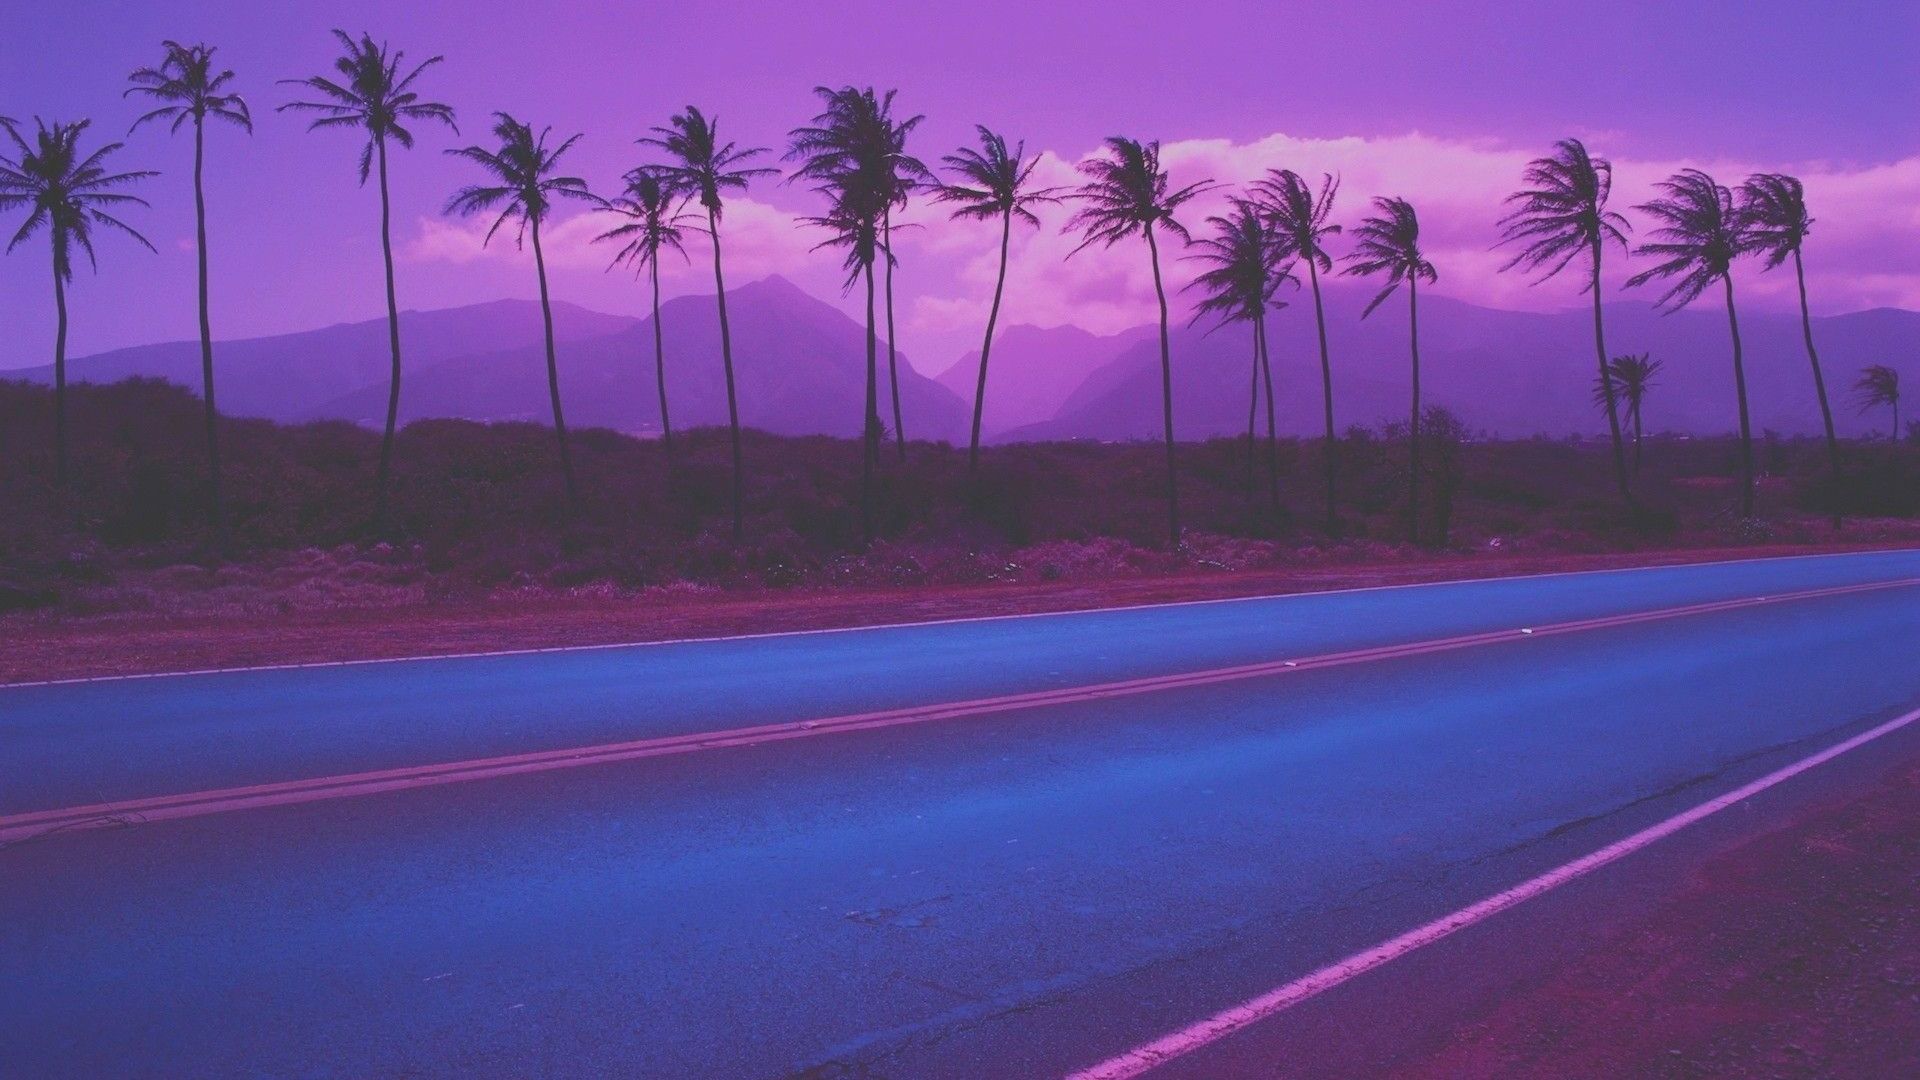 The palm trees are blowing in the wind on the road. - Computer, road, violet, cute purple